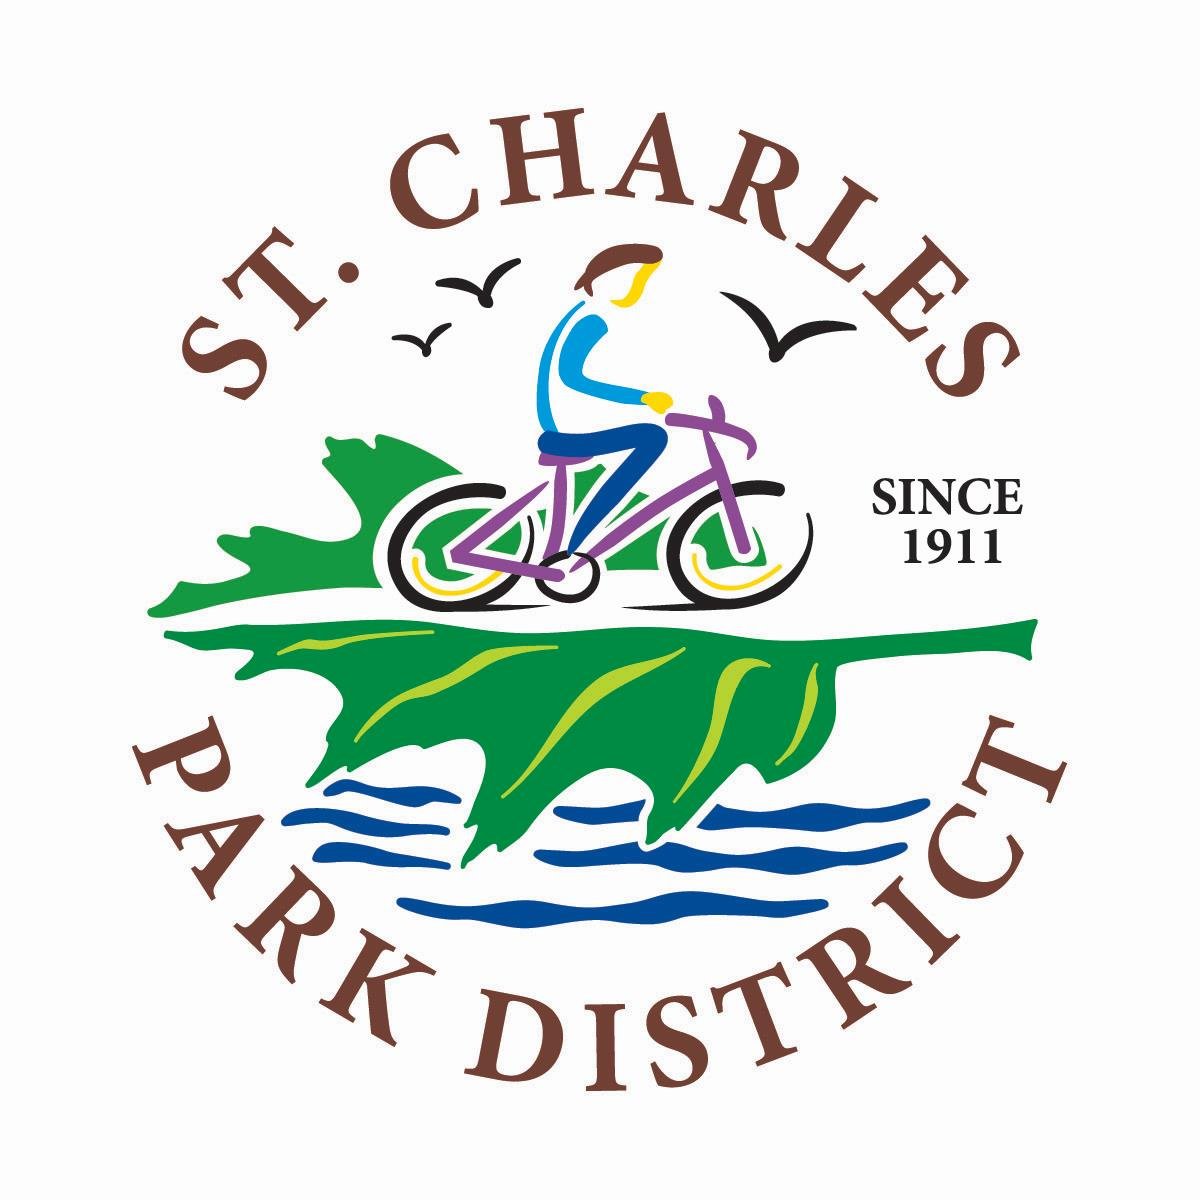 Enriching the quality of life of Park District residents through excellence in programs, parks, facilities and services.